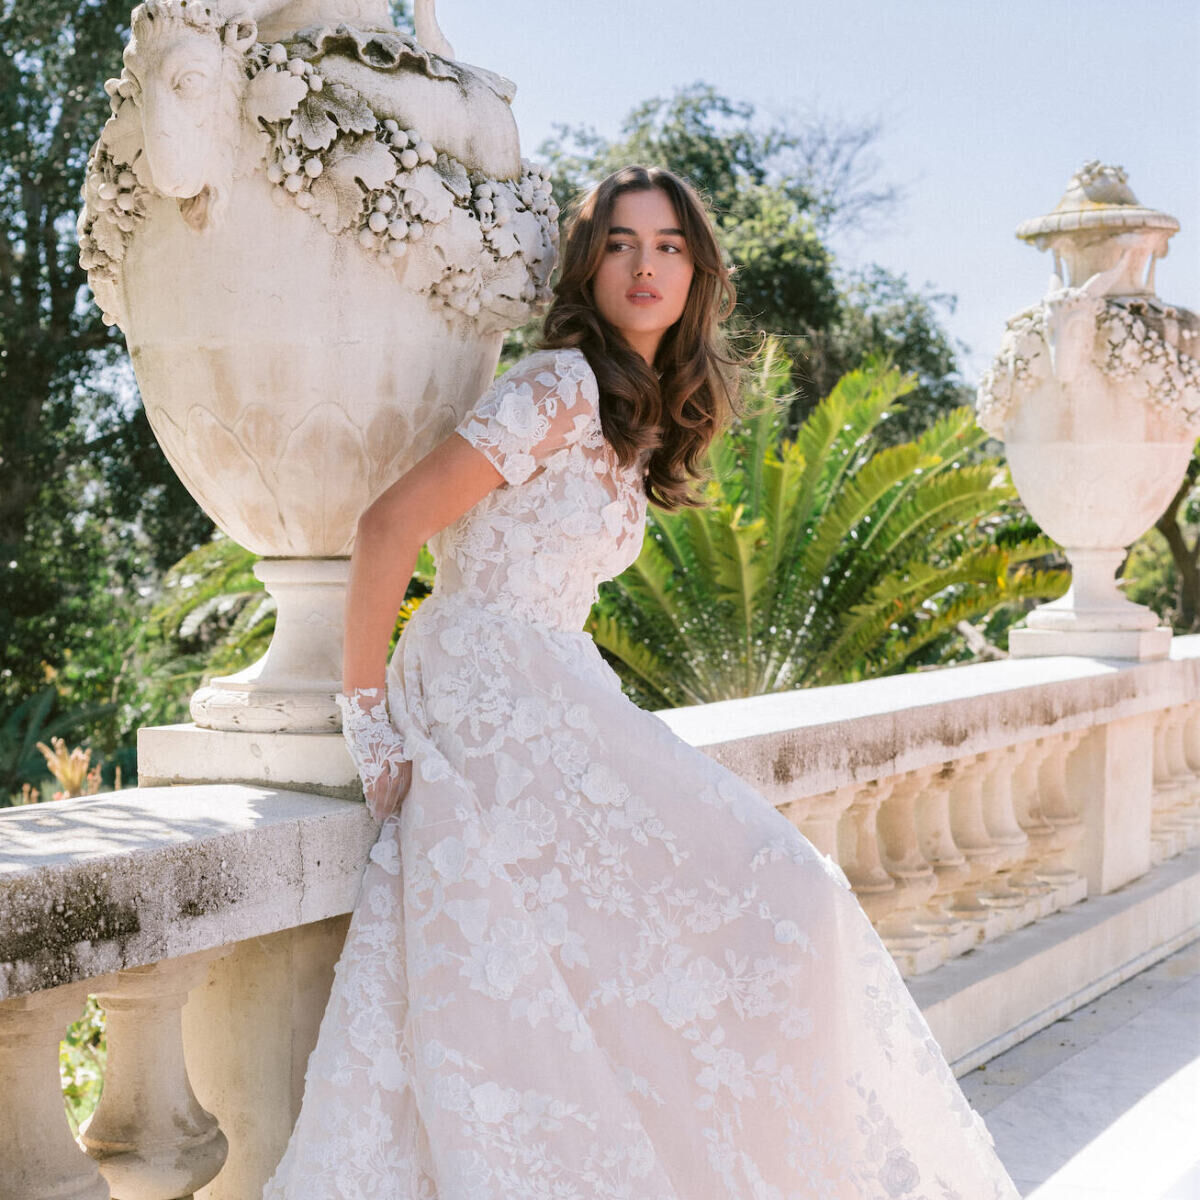 Wedding Gowns 101: Learn the Silhouettes, Wedding Dress Styles